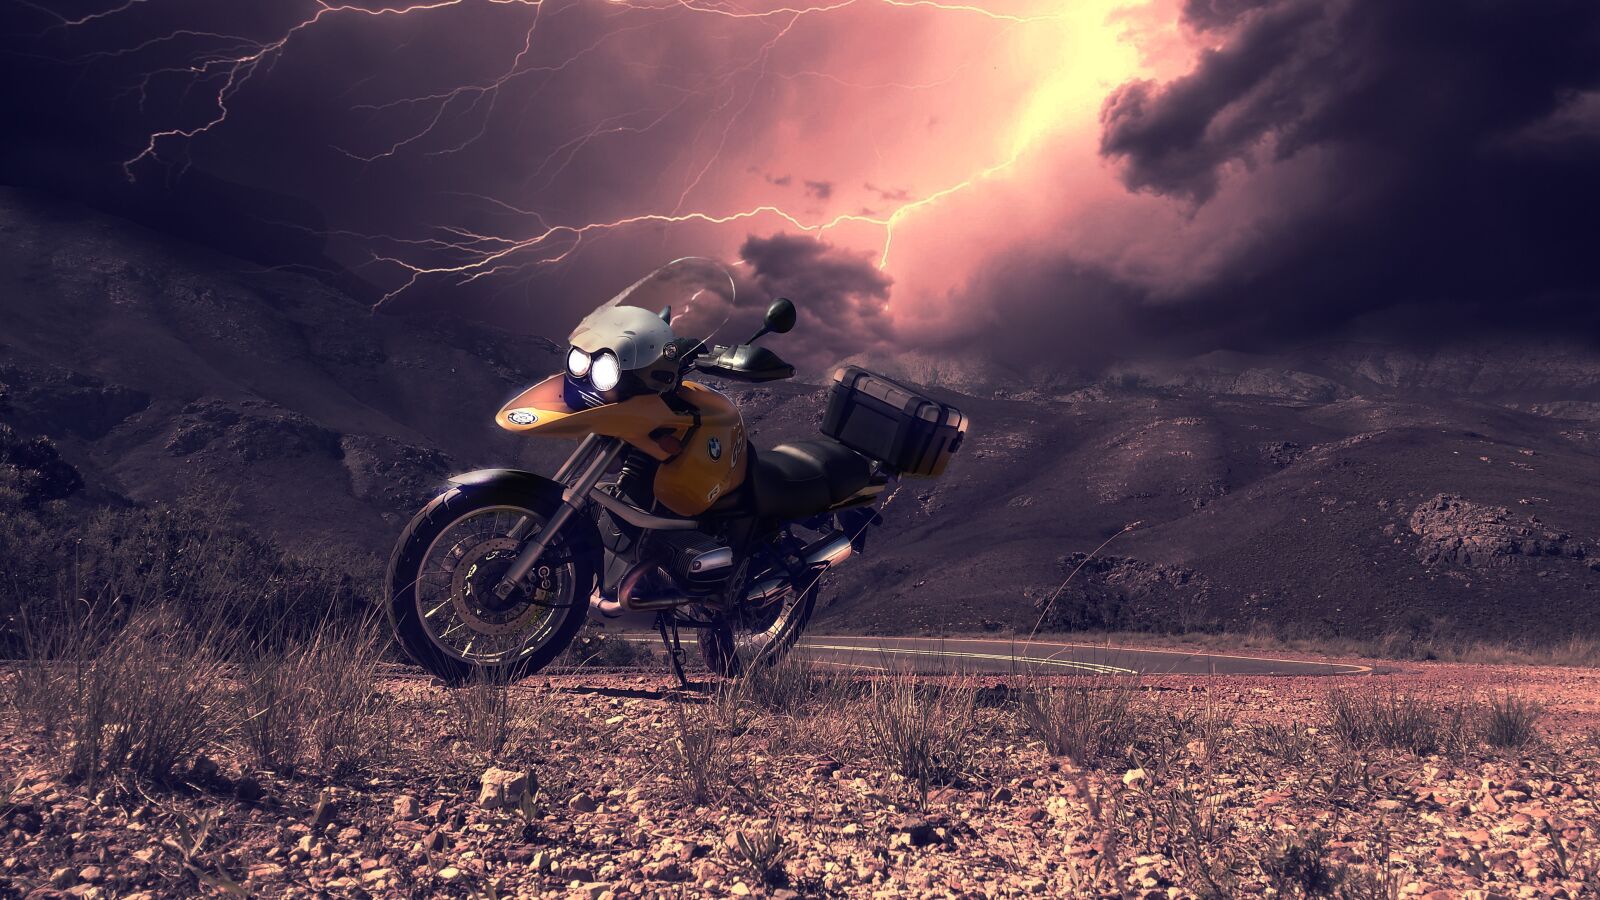 Samsung Galaxy S4 sample photo. Motorcycle, storm, weather photography